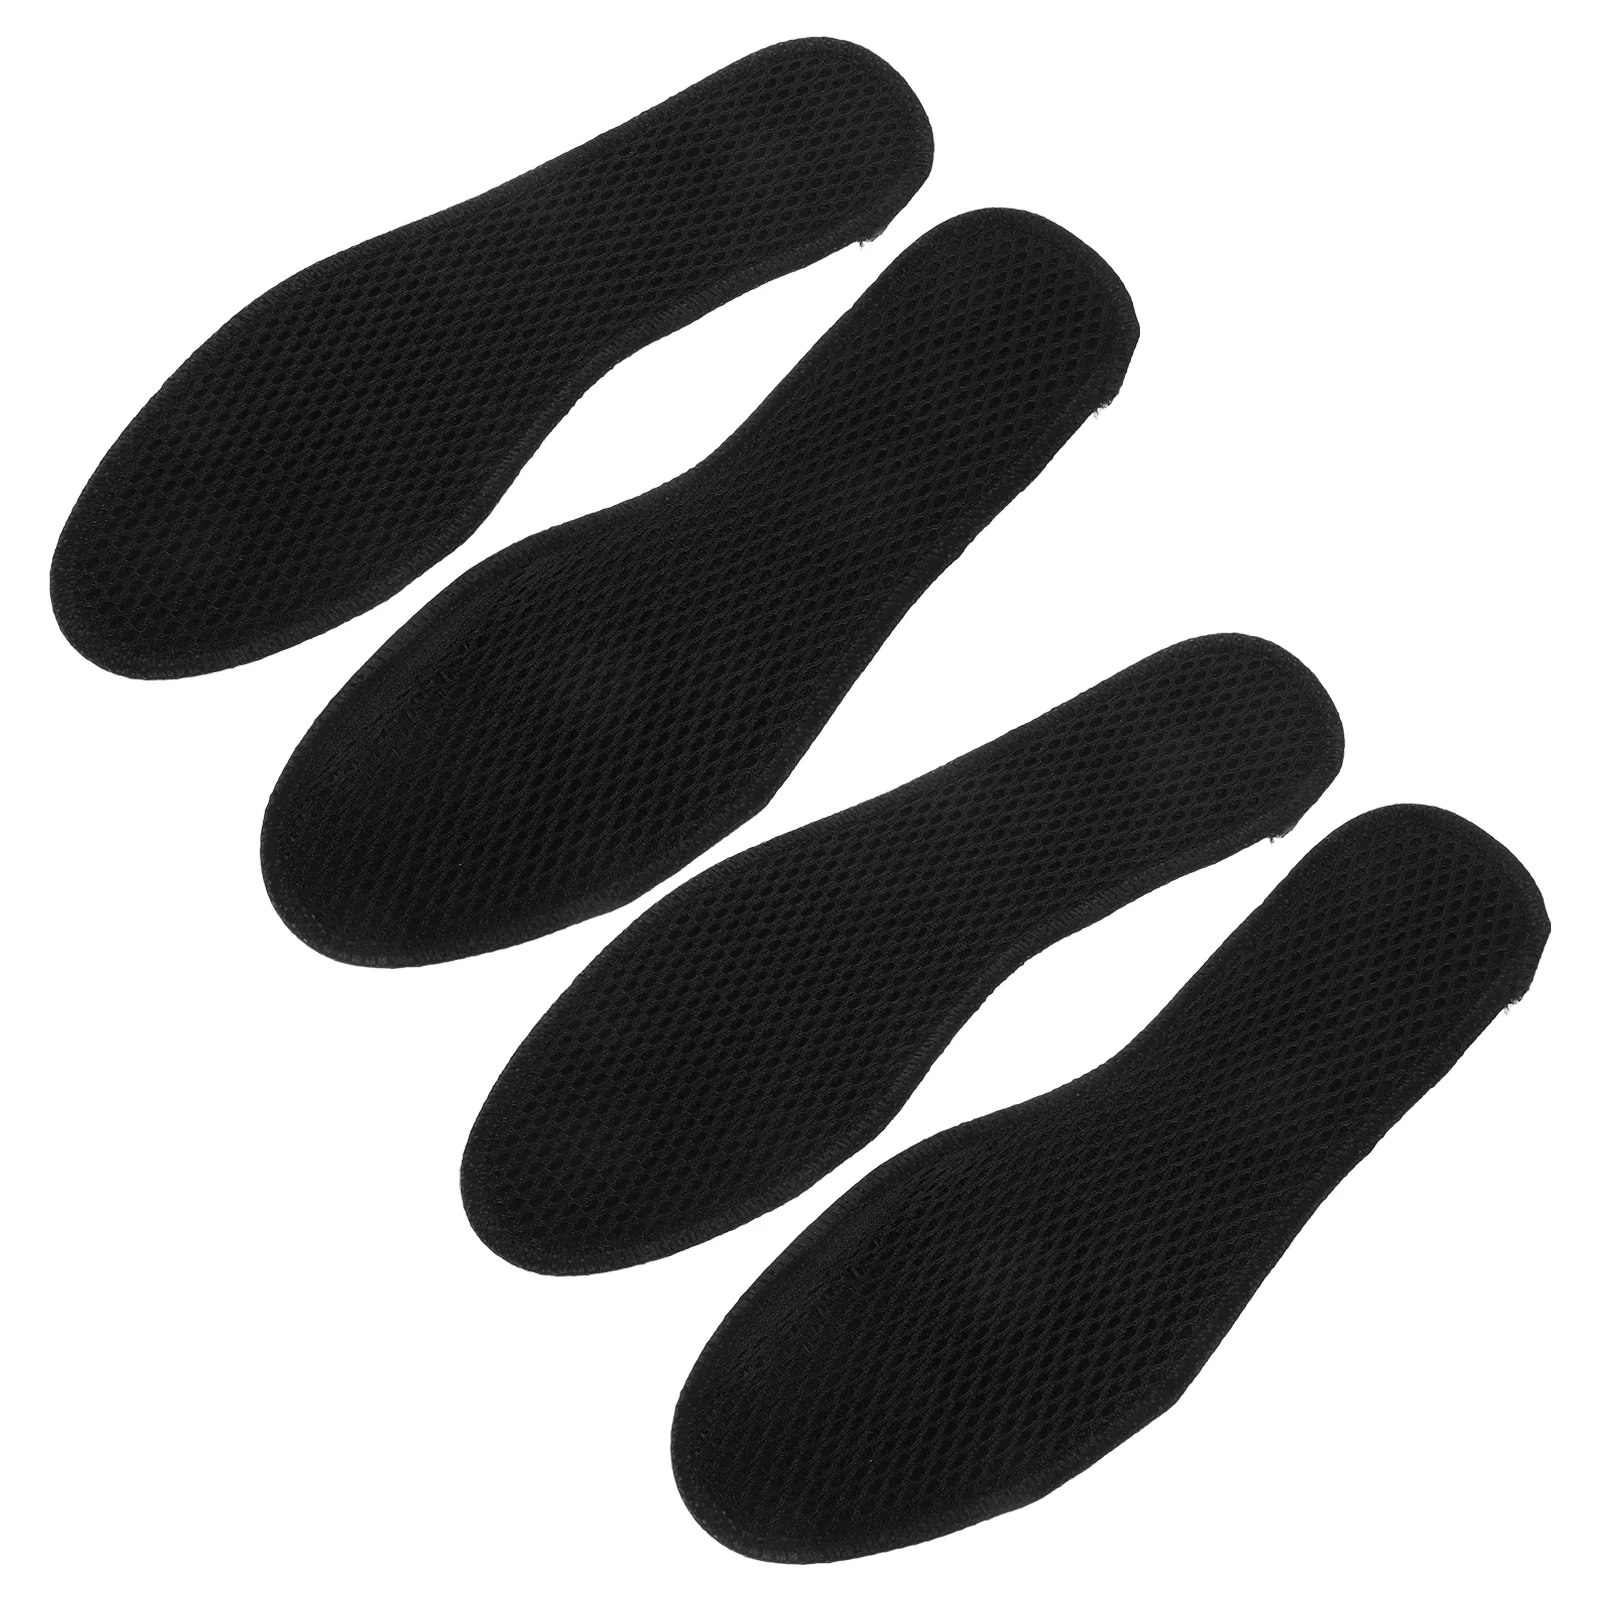 

Charcoal Shoe Insoles Mesh Insoles Sweat Absorbent Anti Odor Shoe Inserts Pads Deodorant for Men Sports Running Black 2 Pairs